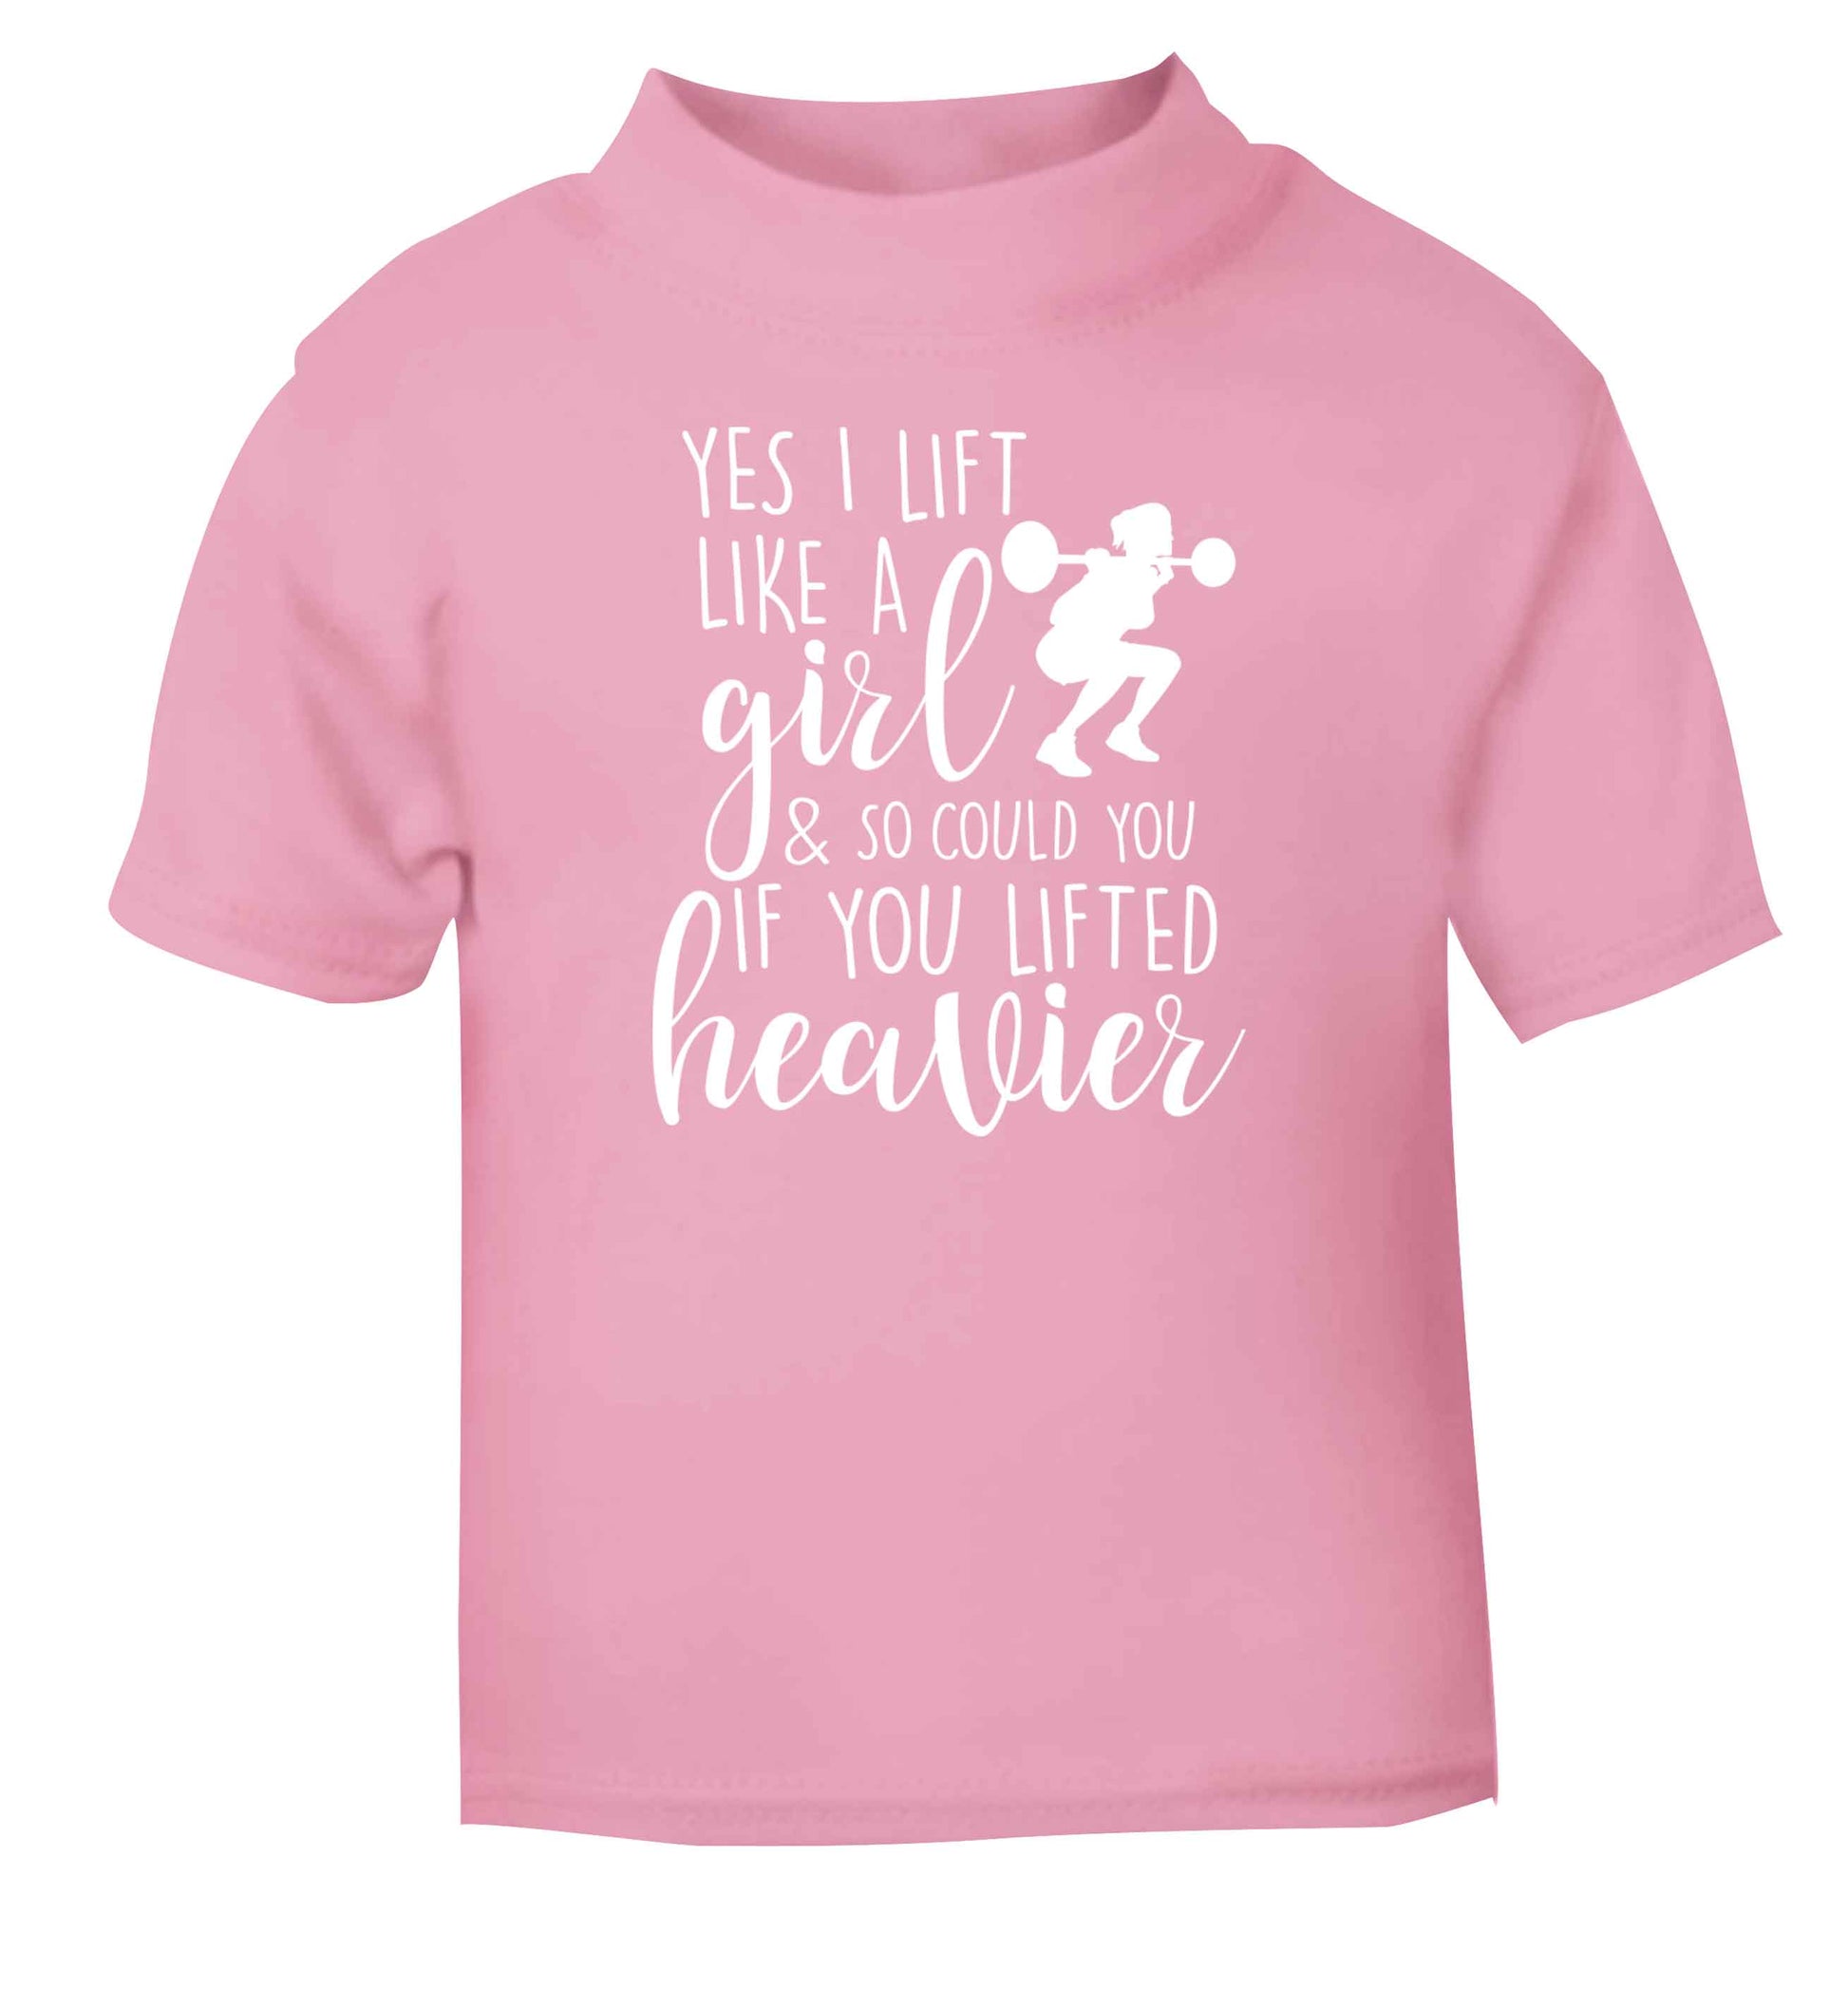 Yes I lift like a girl and so could you if you lifted heavier light pink Baby Toddler Tshirt 2 Years